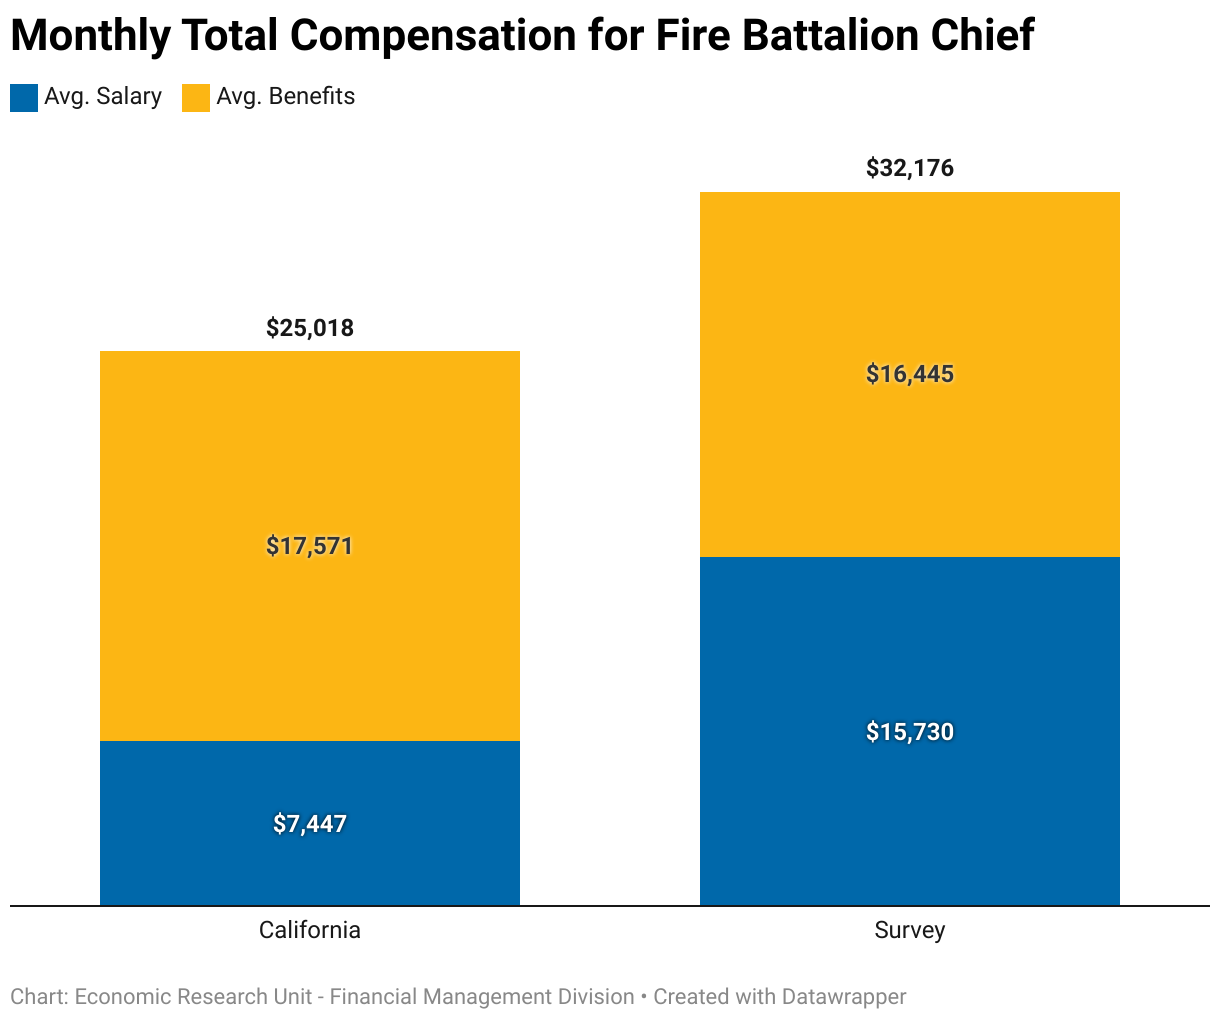 This chart compares the average monthly compensation for Fire Battalion Chief across State and local firefighters. The average monthly compensation for State firefighters was $25,018 ($7,447 in salary and $17,571 in benefits). The average monthly compensation for local fighters was $32,176 ($15,730 in salary and $16,445 in benefits).